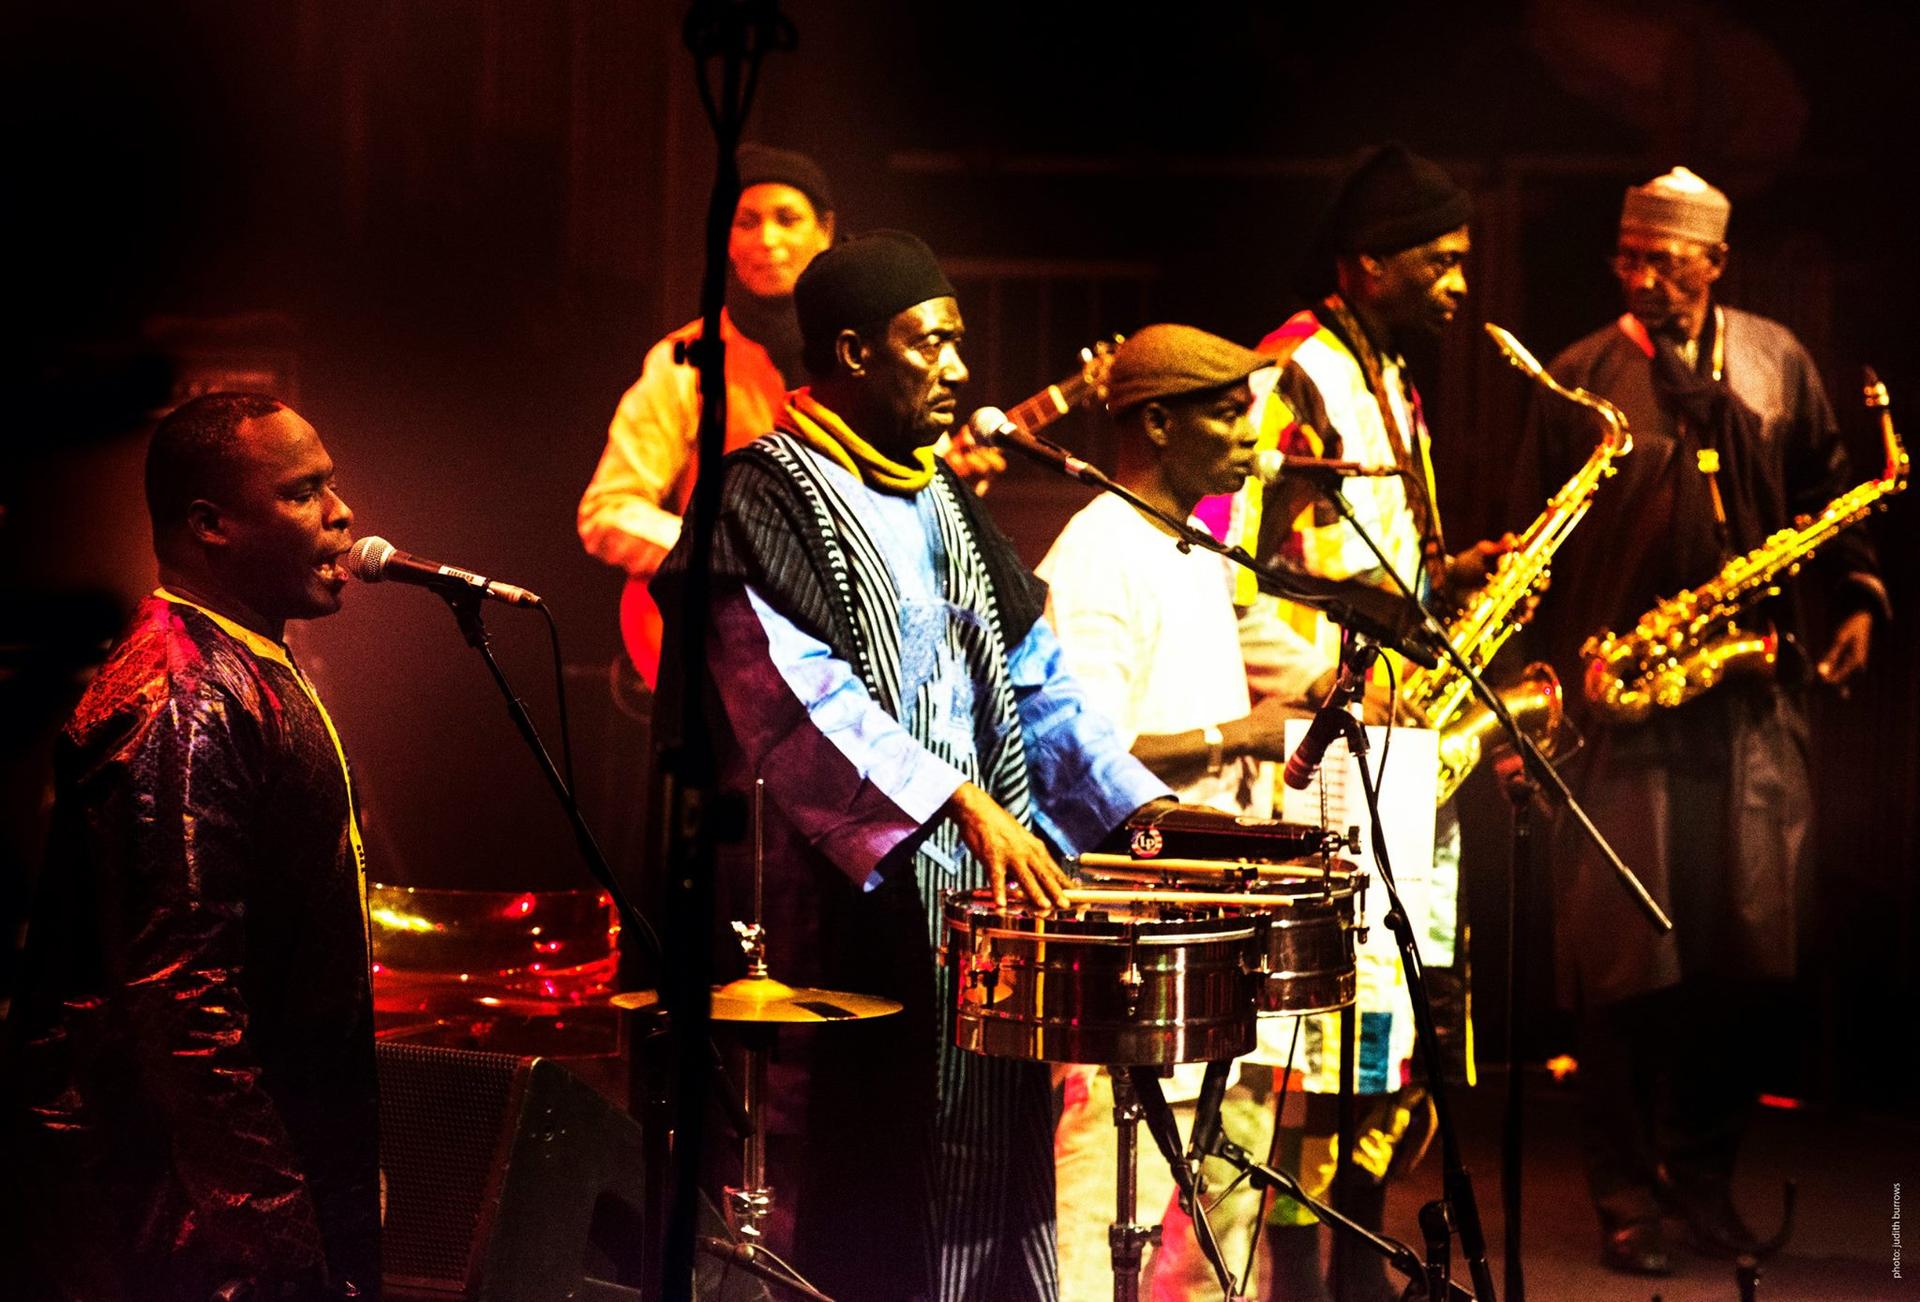 Senegal's Orchestra Baobab on stage